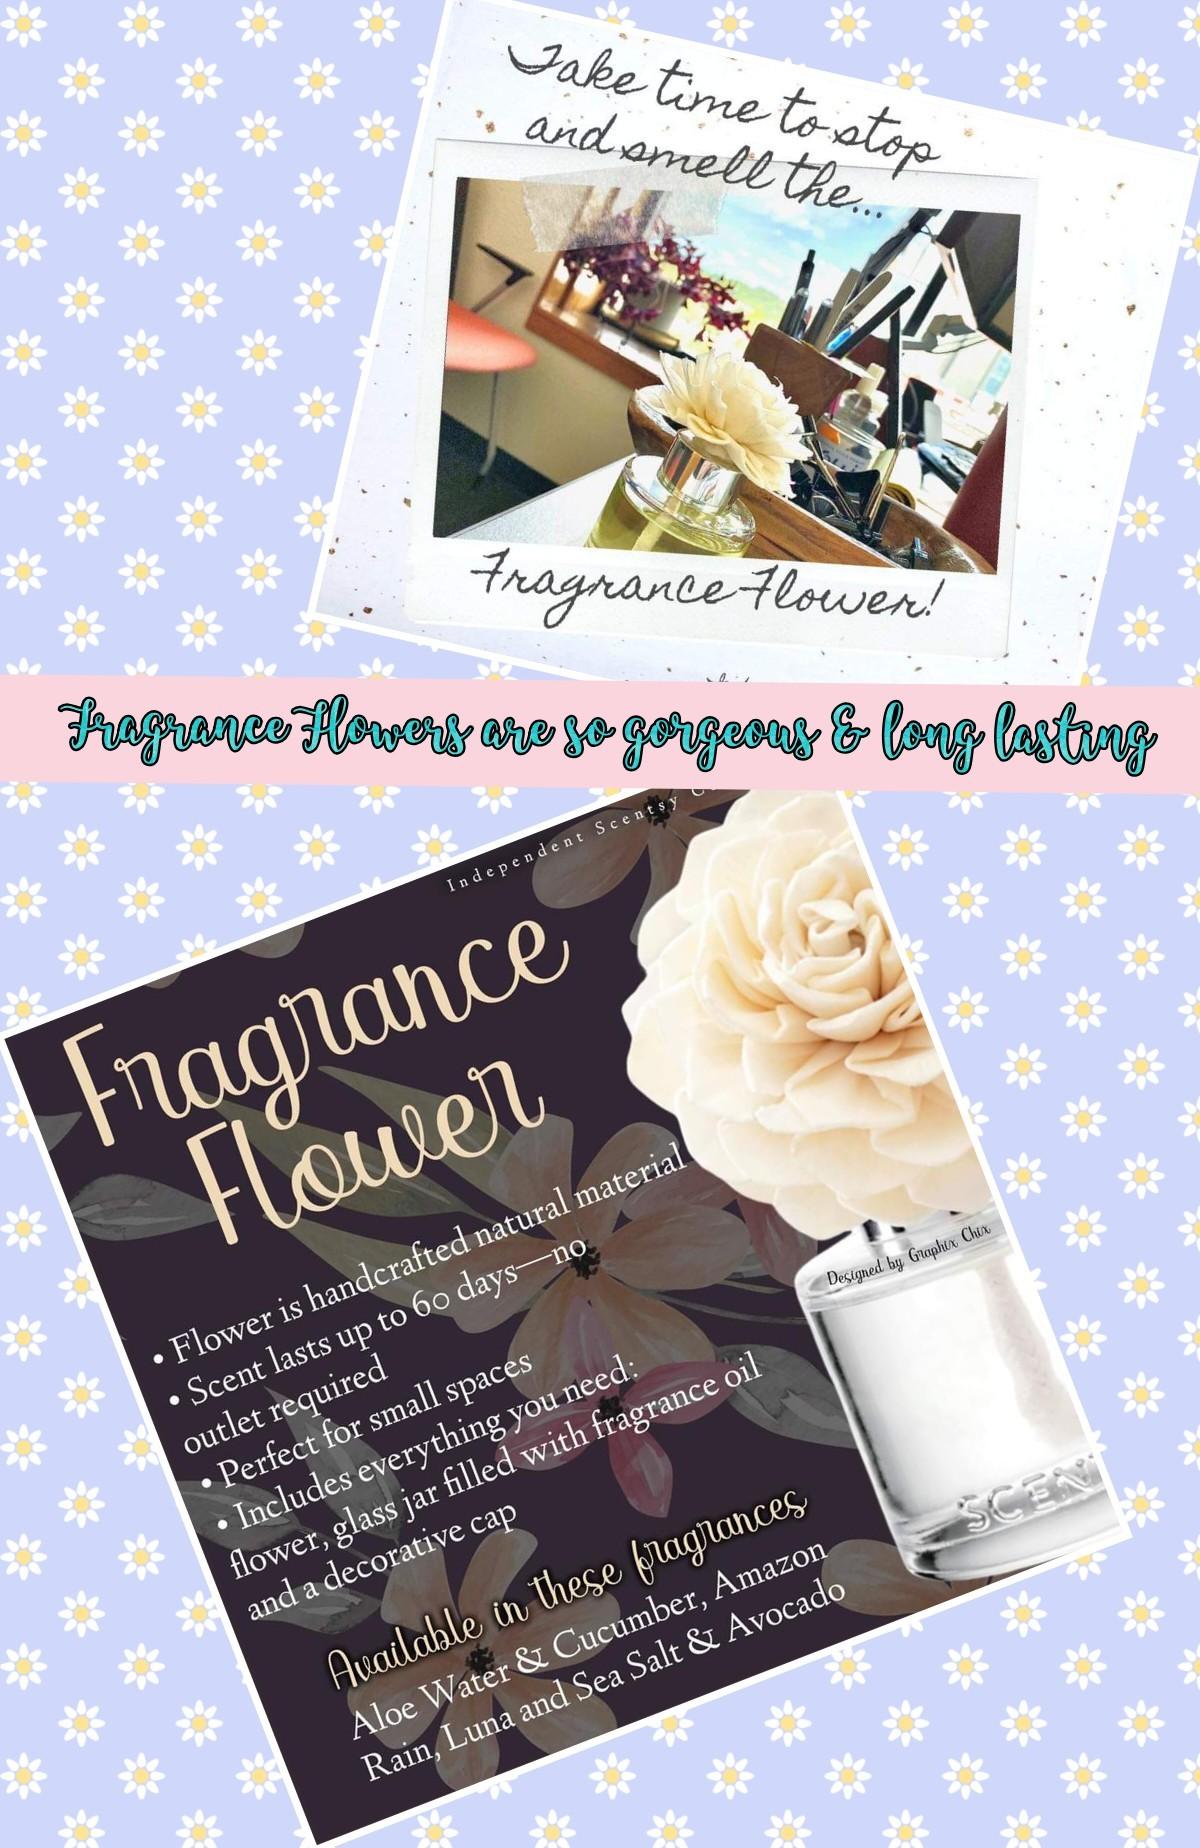 Fragrance Flowers are so gorgeous & long lasting 💖 
You can't go wrong with them. Put them anywhere in your home!!!